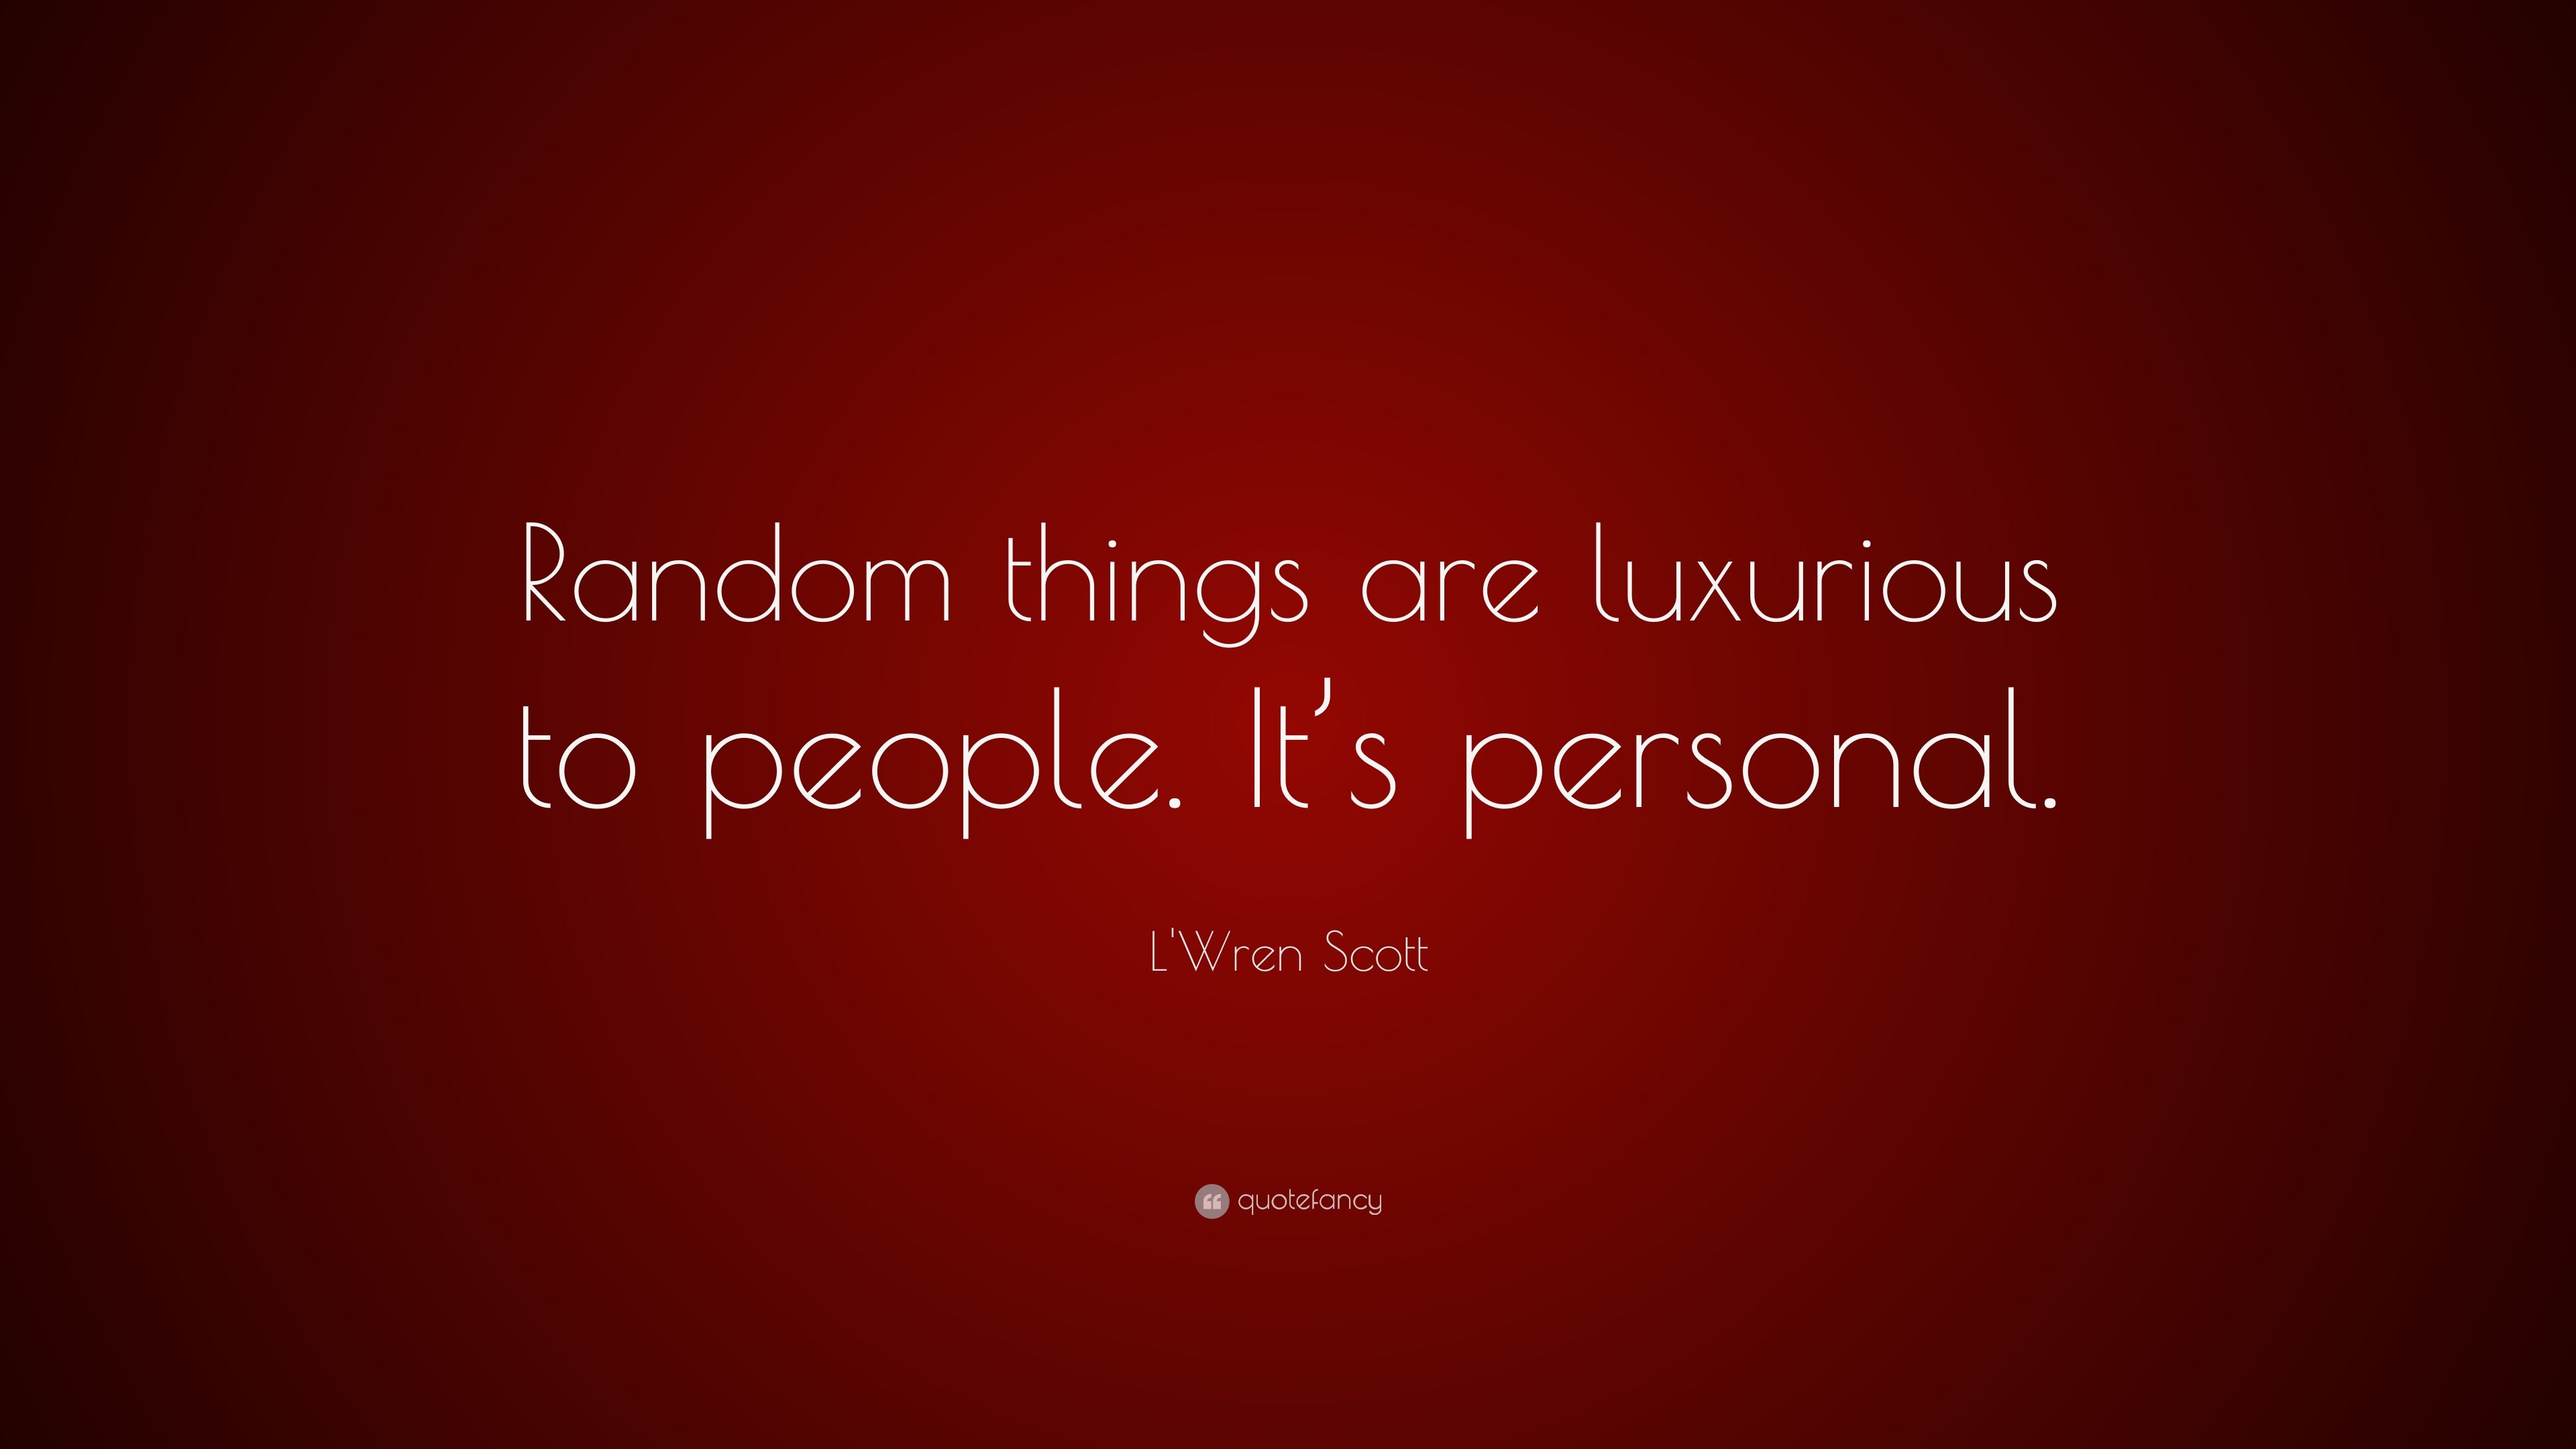 L'Wren Scott Quote: “Random things are luxurious to people. It's personal.” (7 wallpaper)